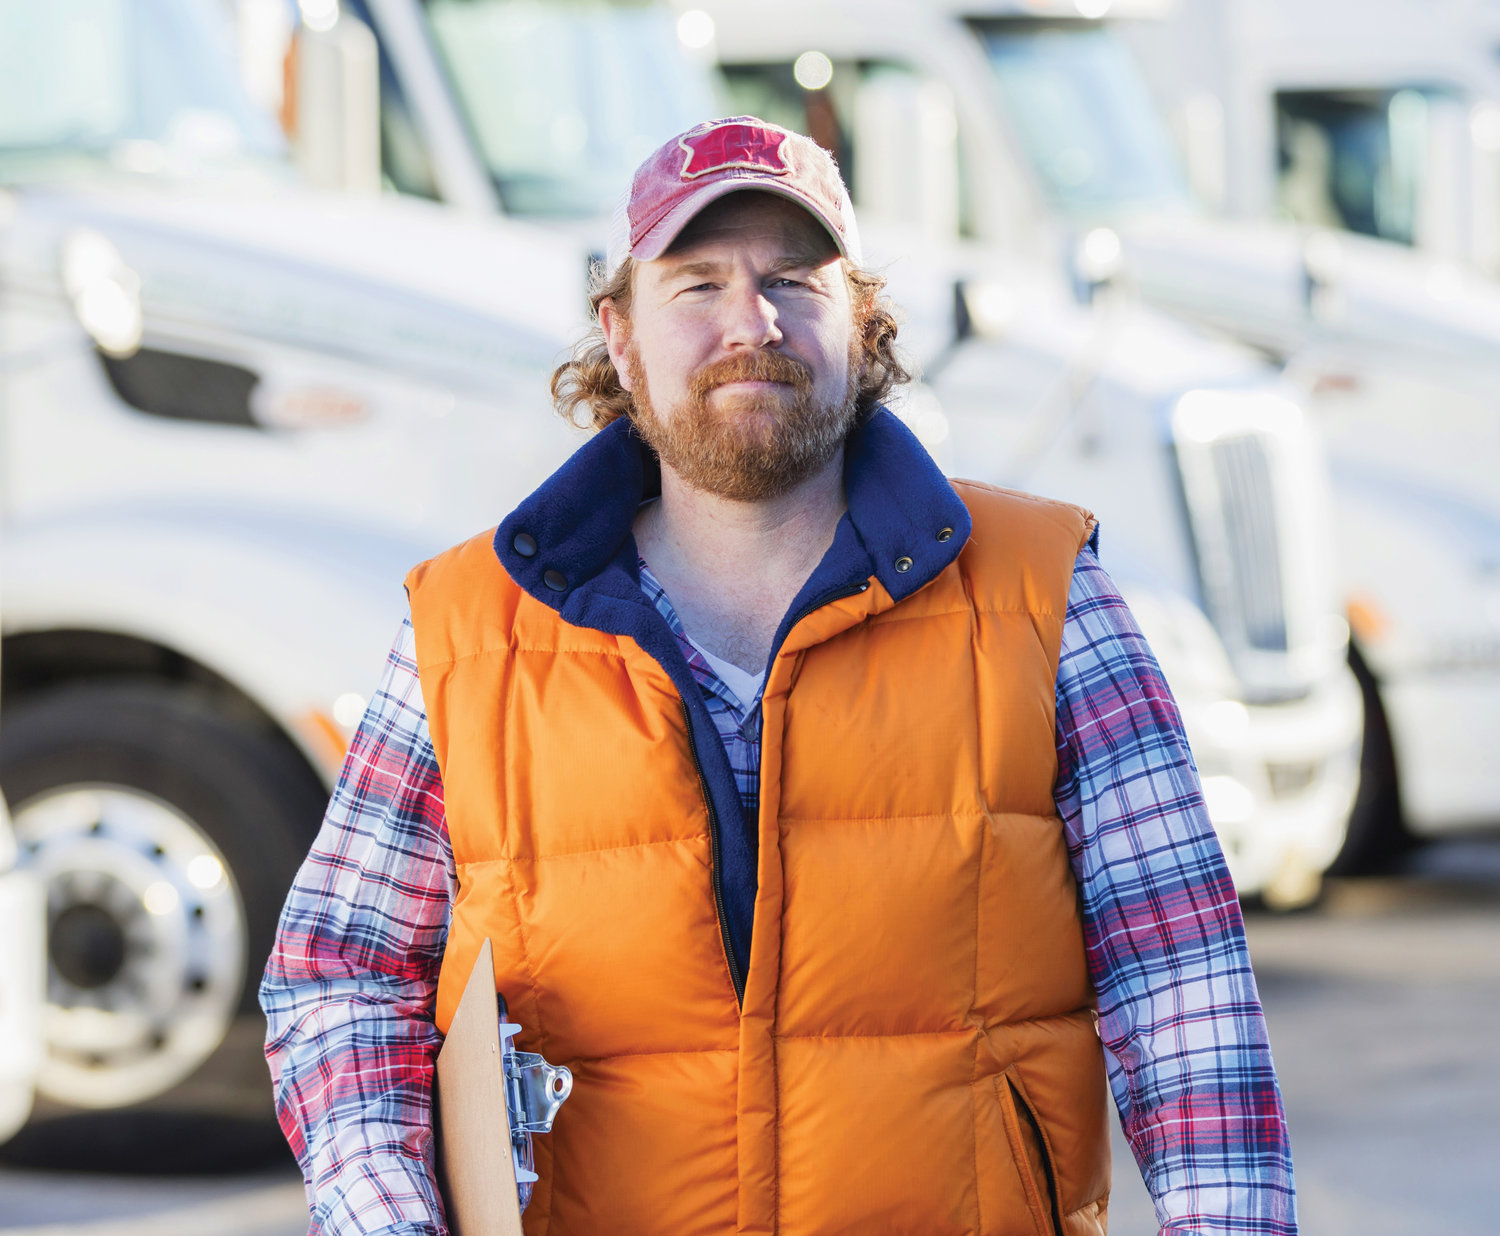 Truckers may soon find some relief with deliveries if a recently proposed plan is set in motion.